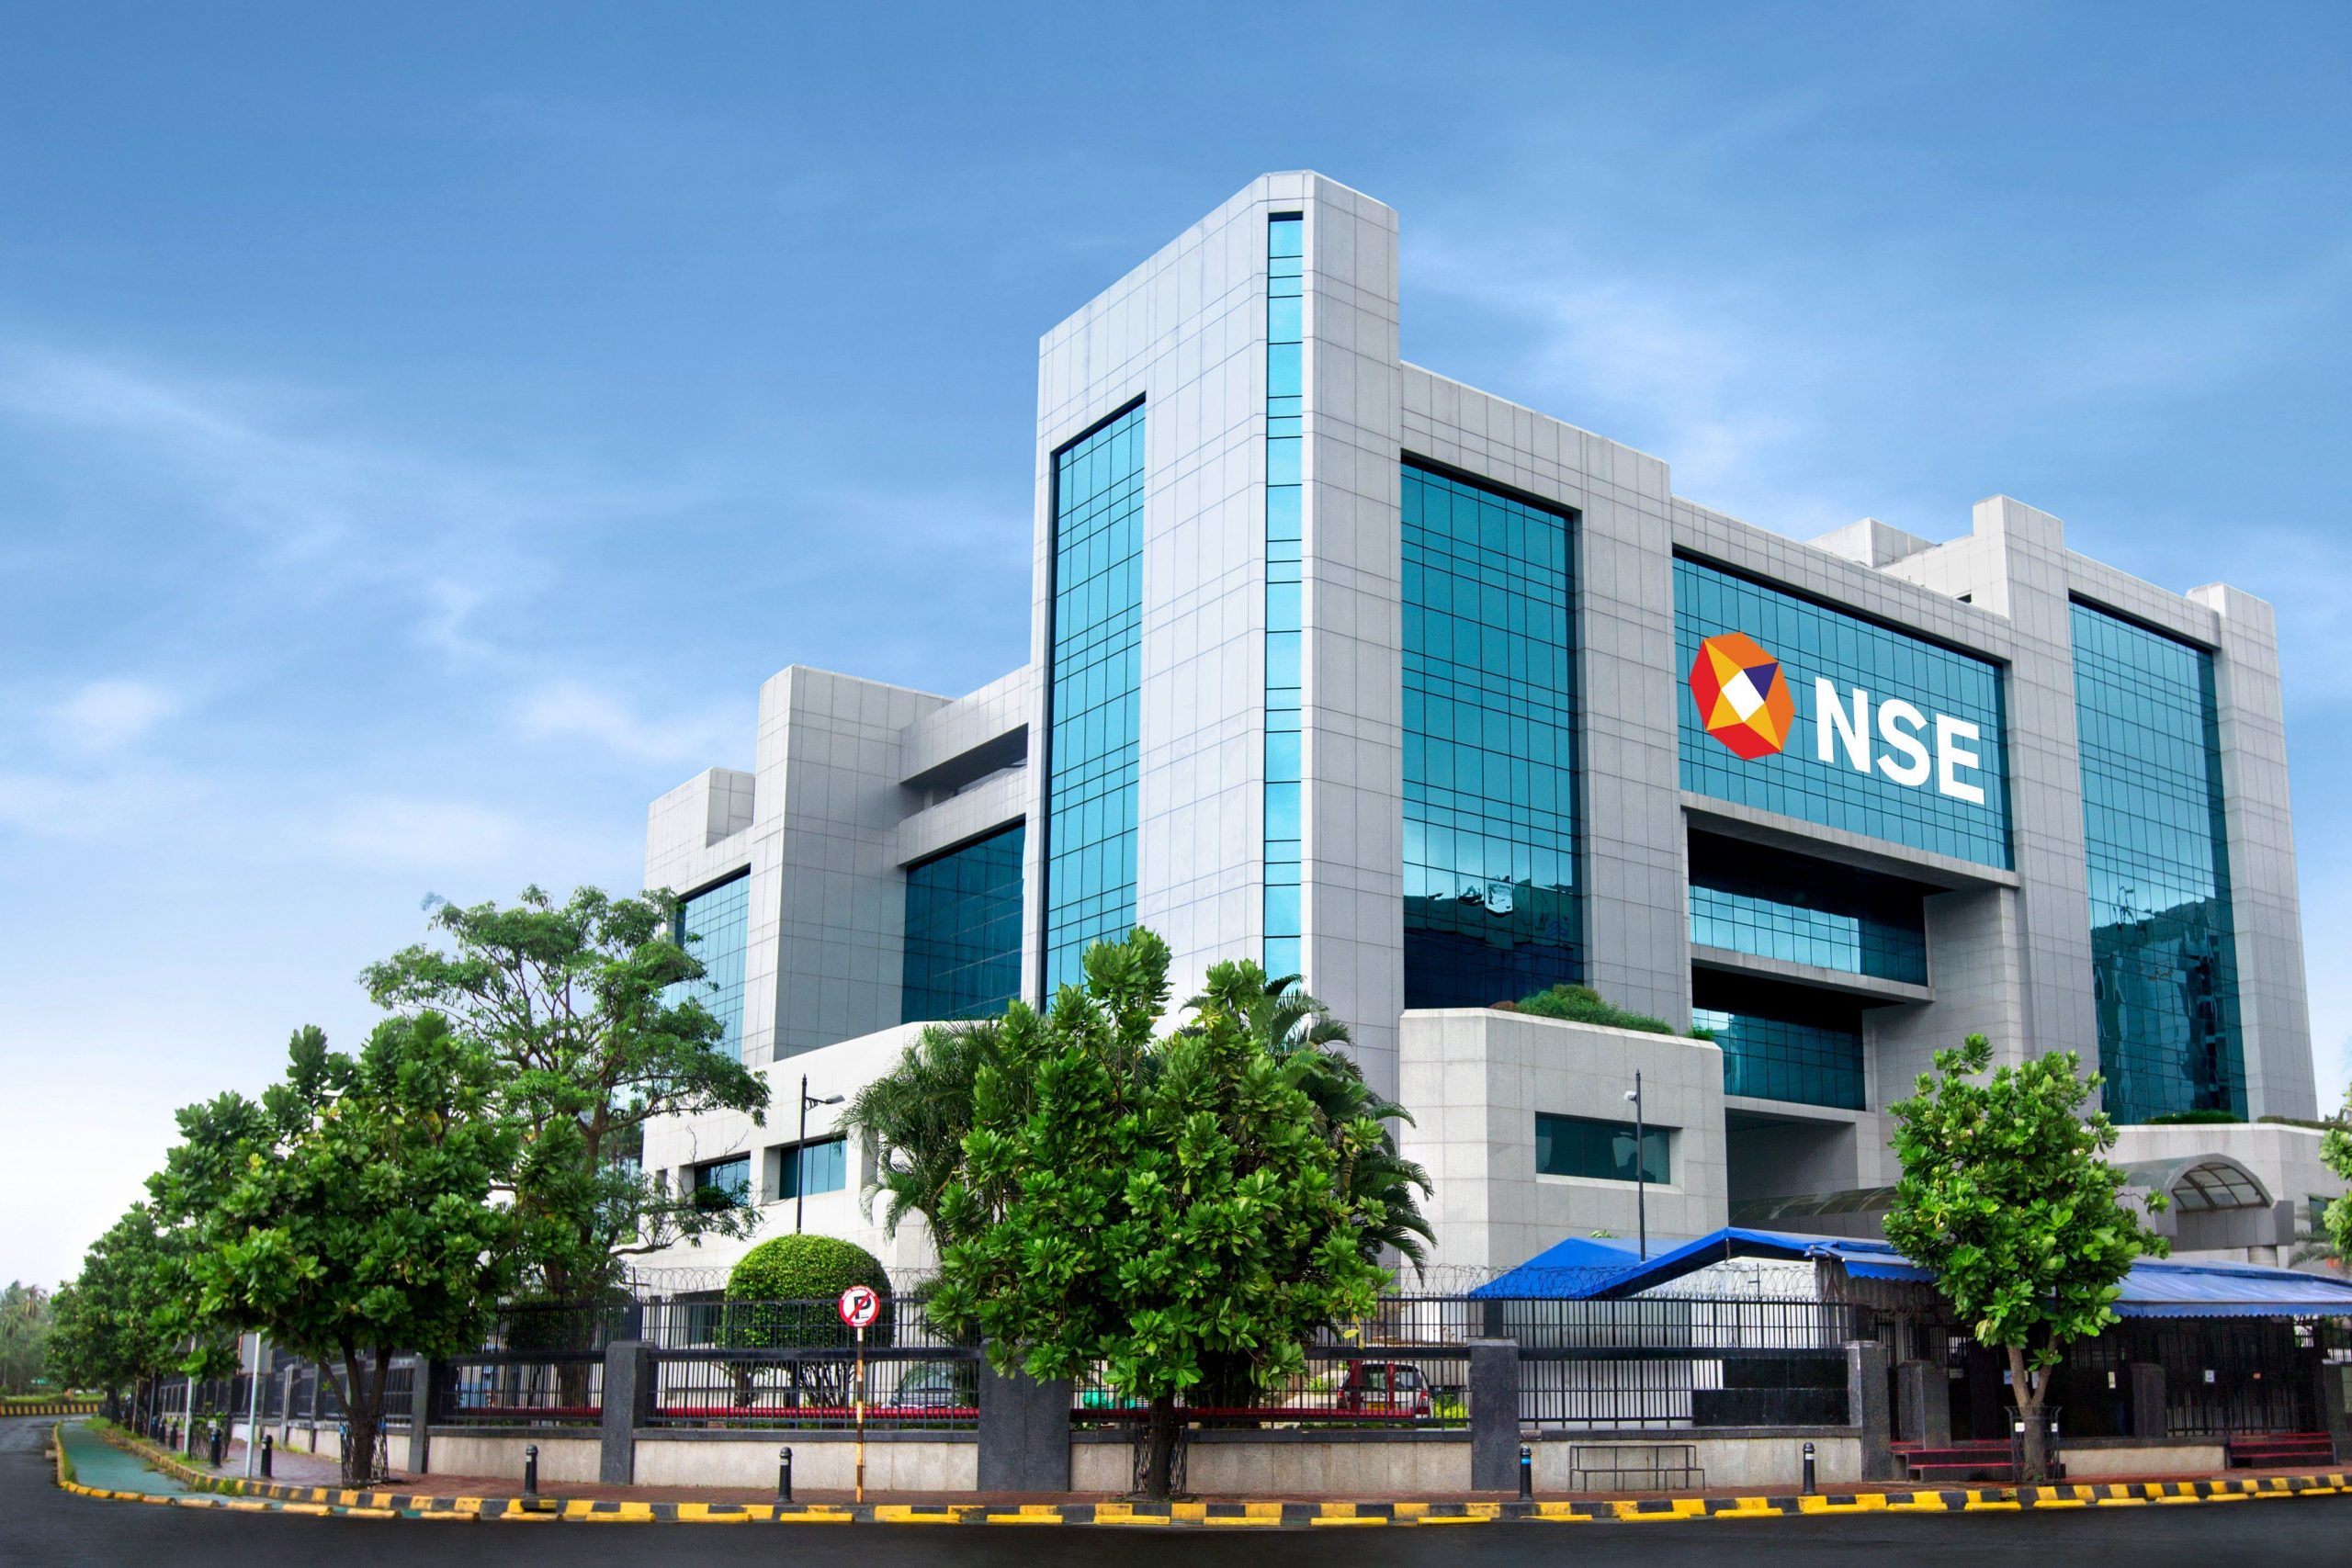 NSE F&O Ban: No stock has been put under ban on Friday, March 11, 2022